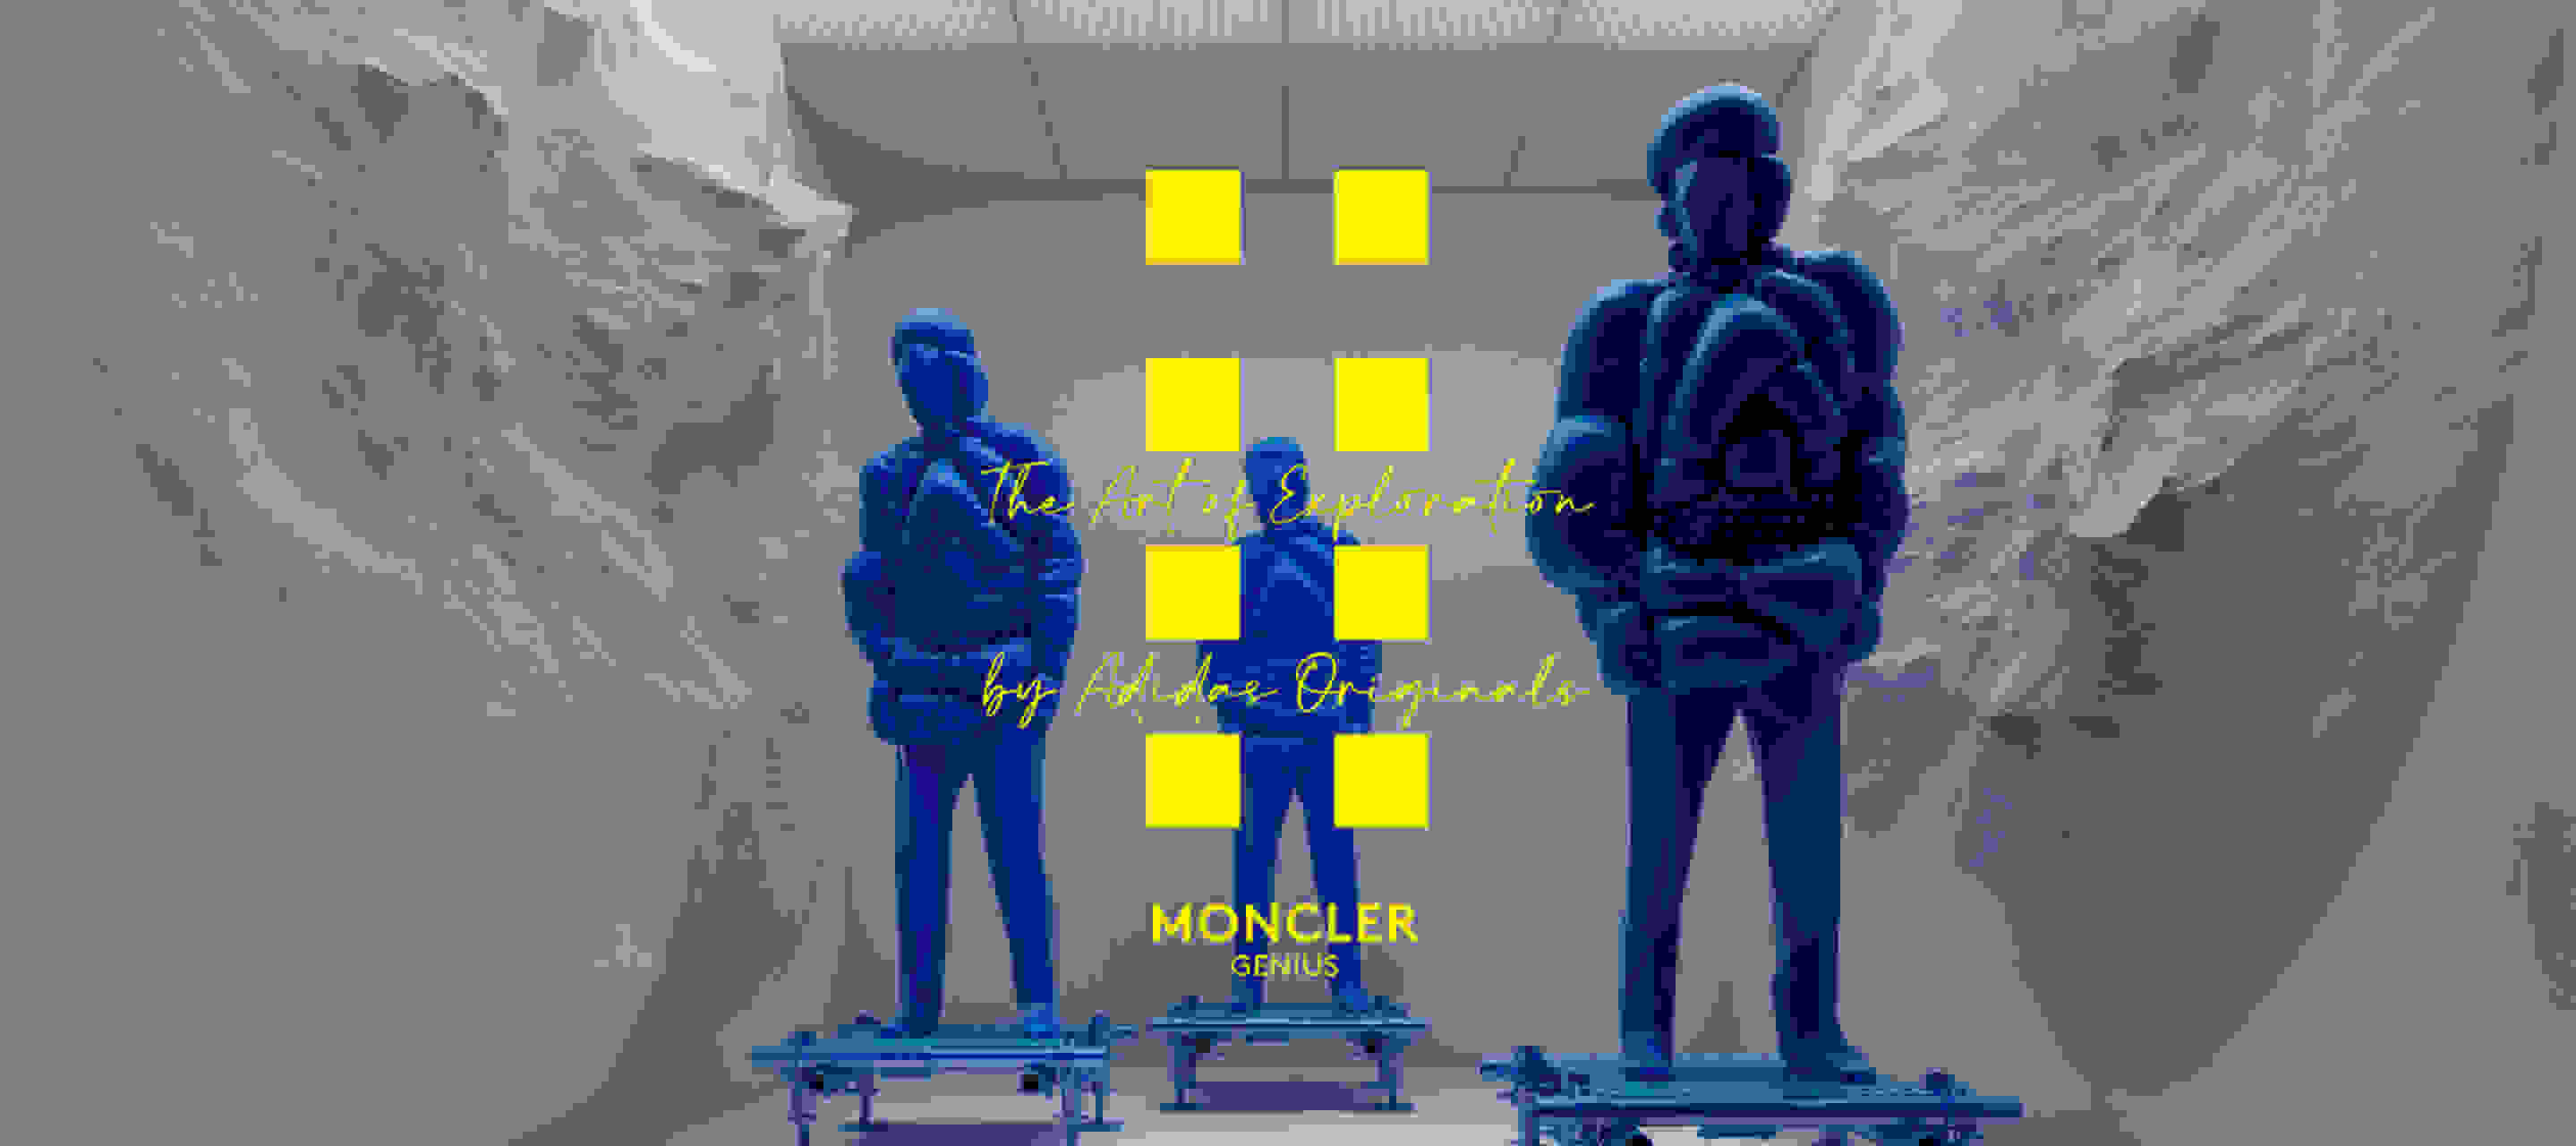 The words "The Art of Exploration by adidas Originals" are written above the Moncler Genius logo, against a campaign image backdrop.